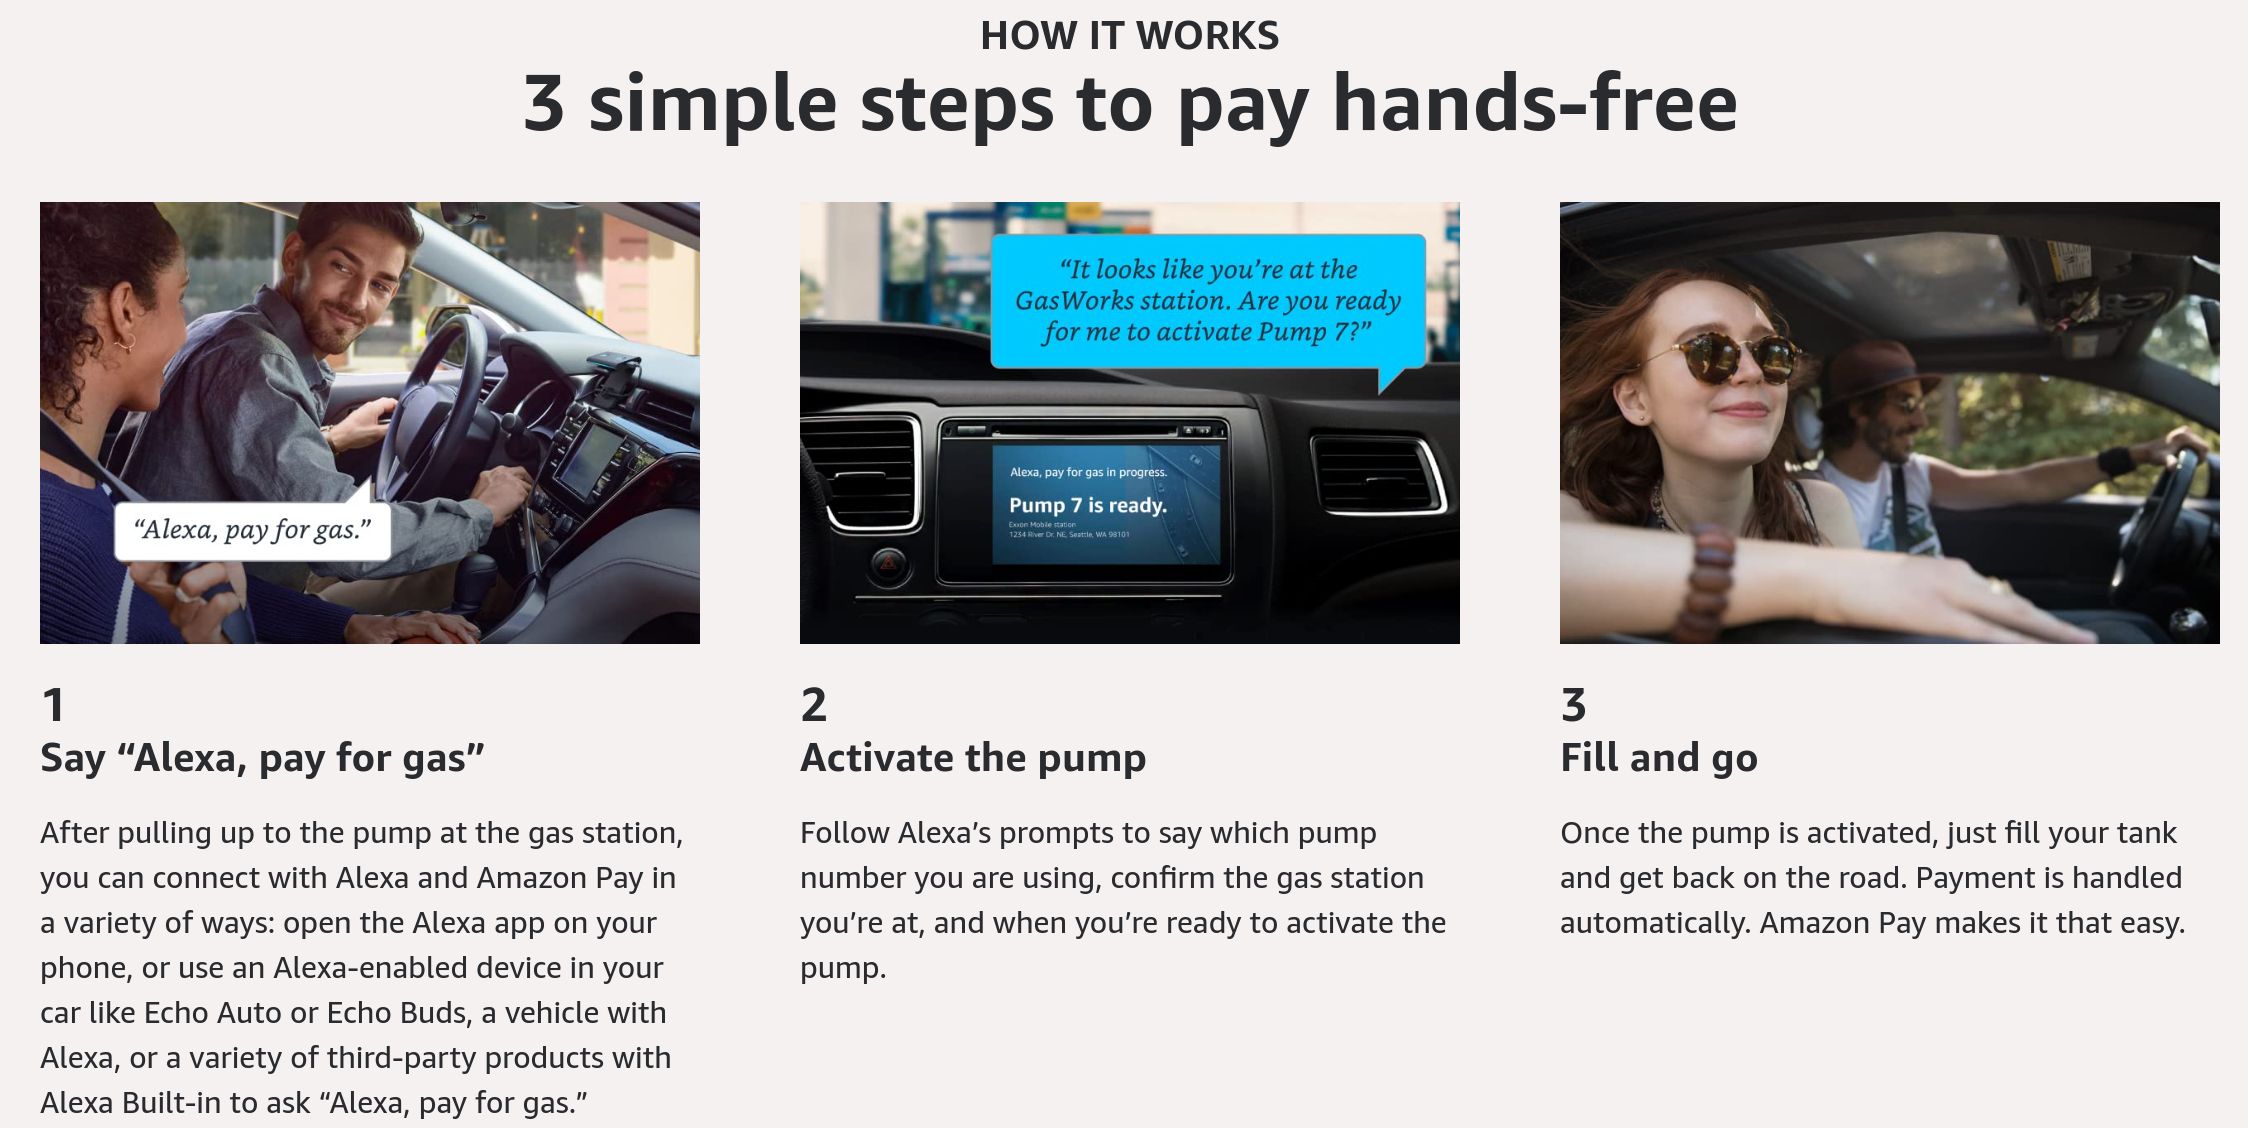 The steps to use Alexa to pay for gas